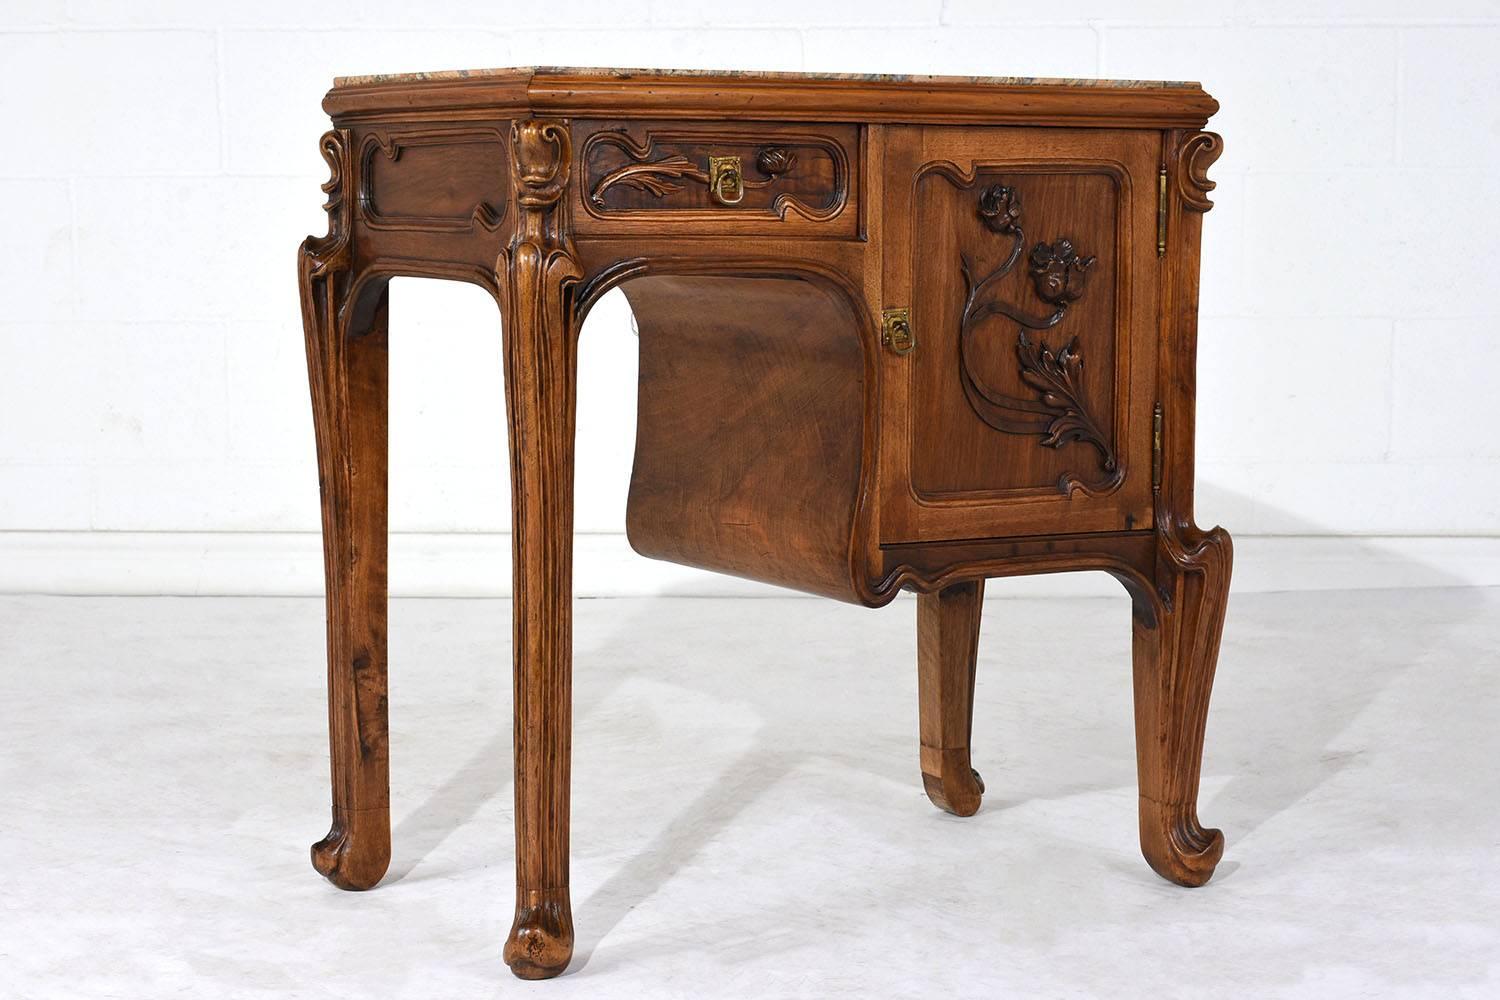 Carved Early 20th Century Art Nouveau Nightstand in the Manner of Louis Majorelle